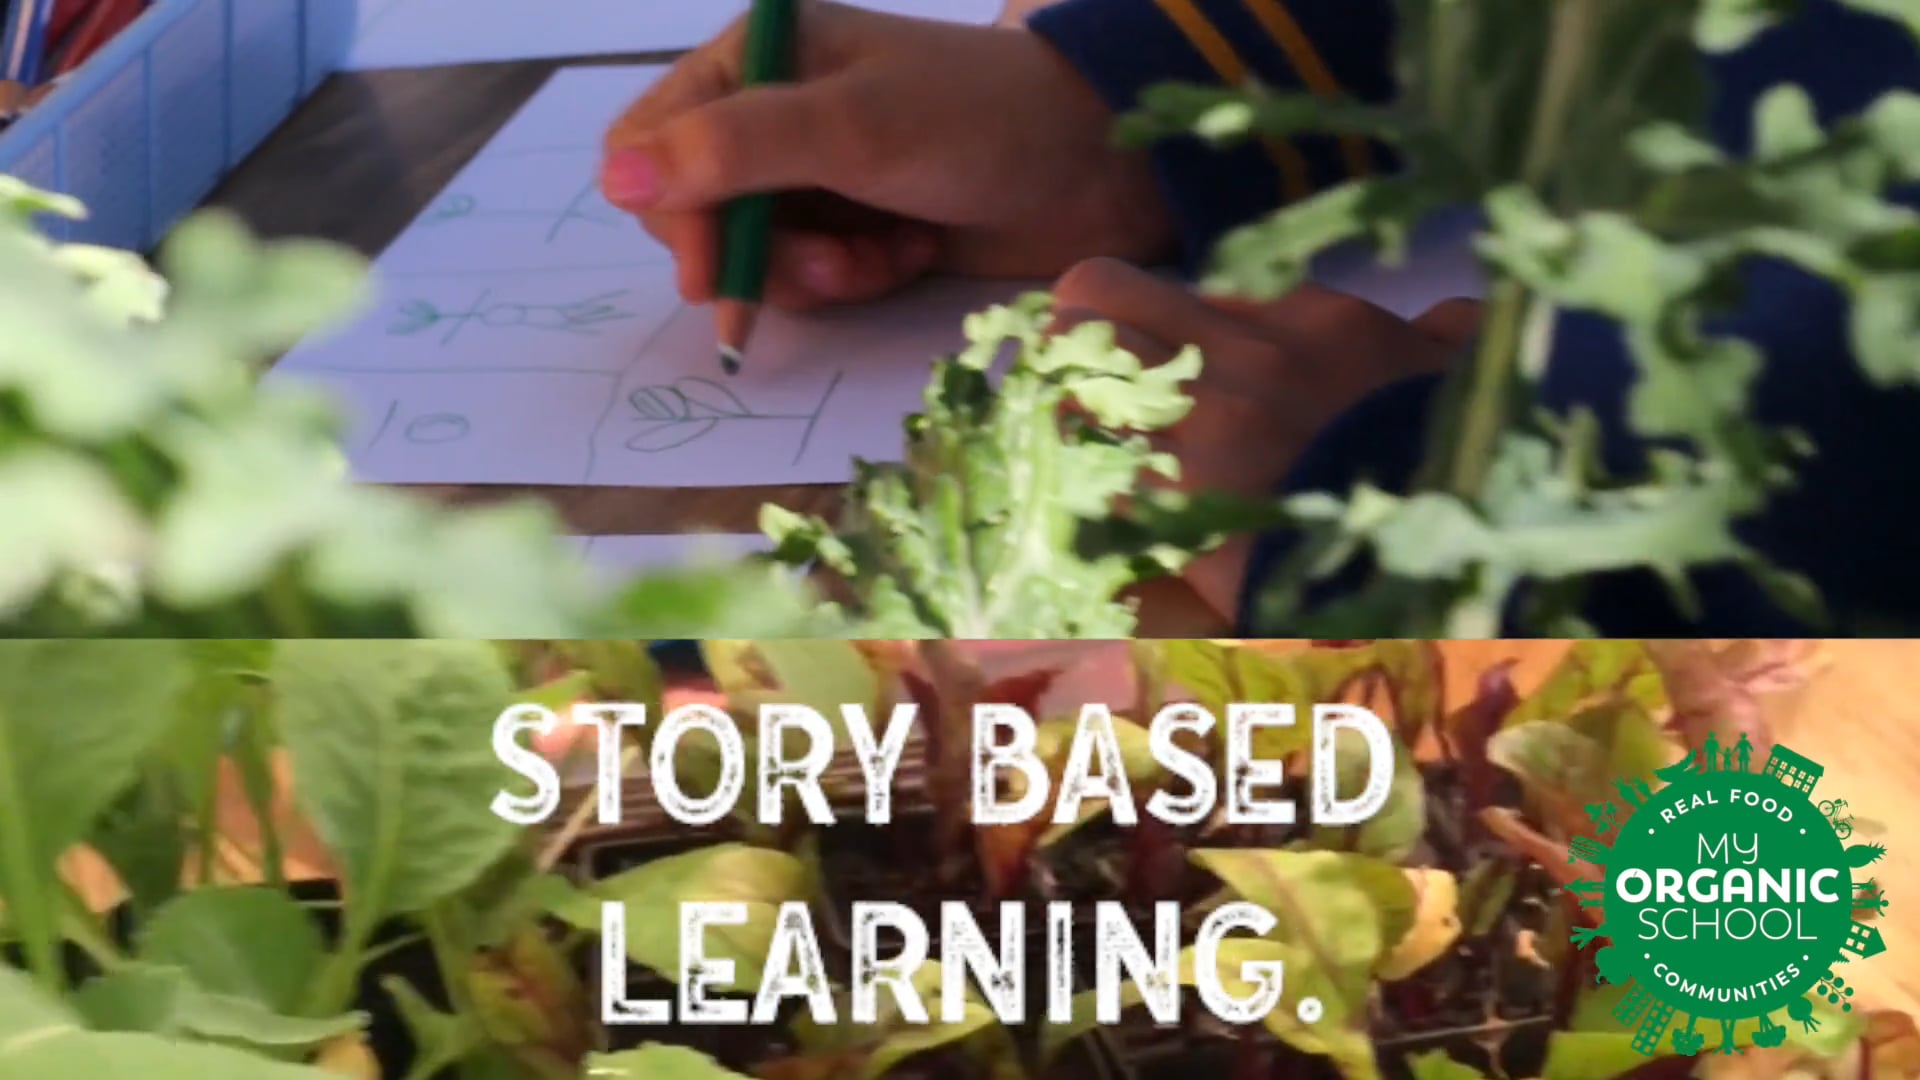 STORY TELLING AS A TOOL TO TEACH HEALTHY NUTRTION